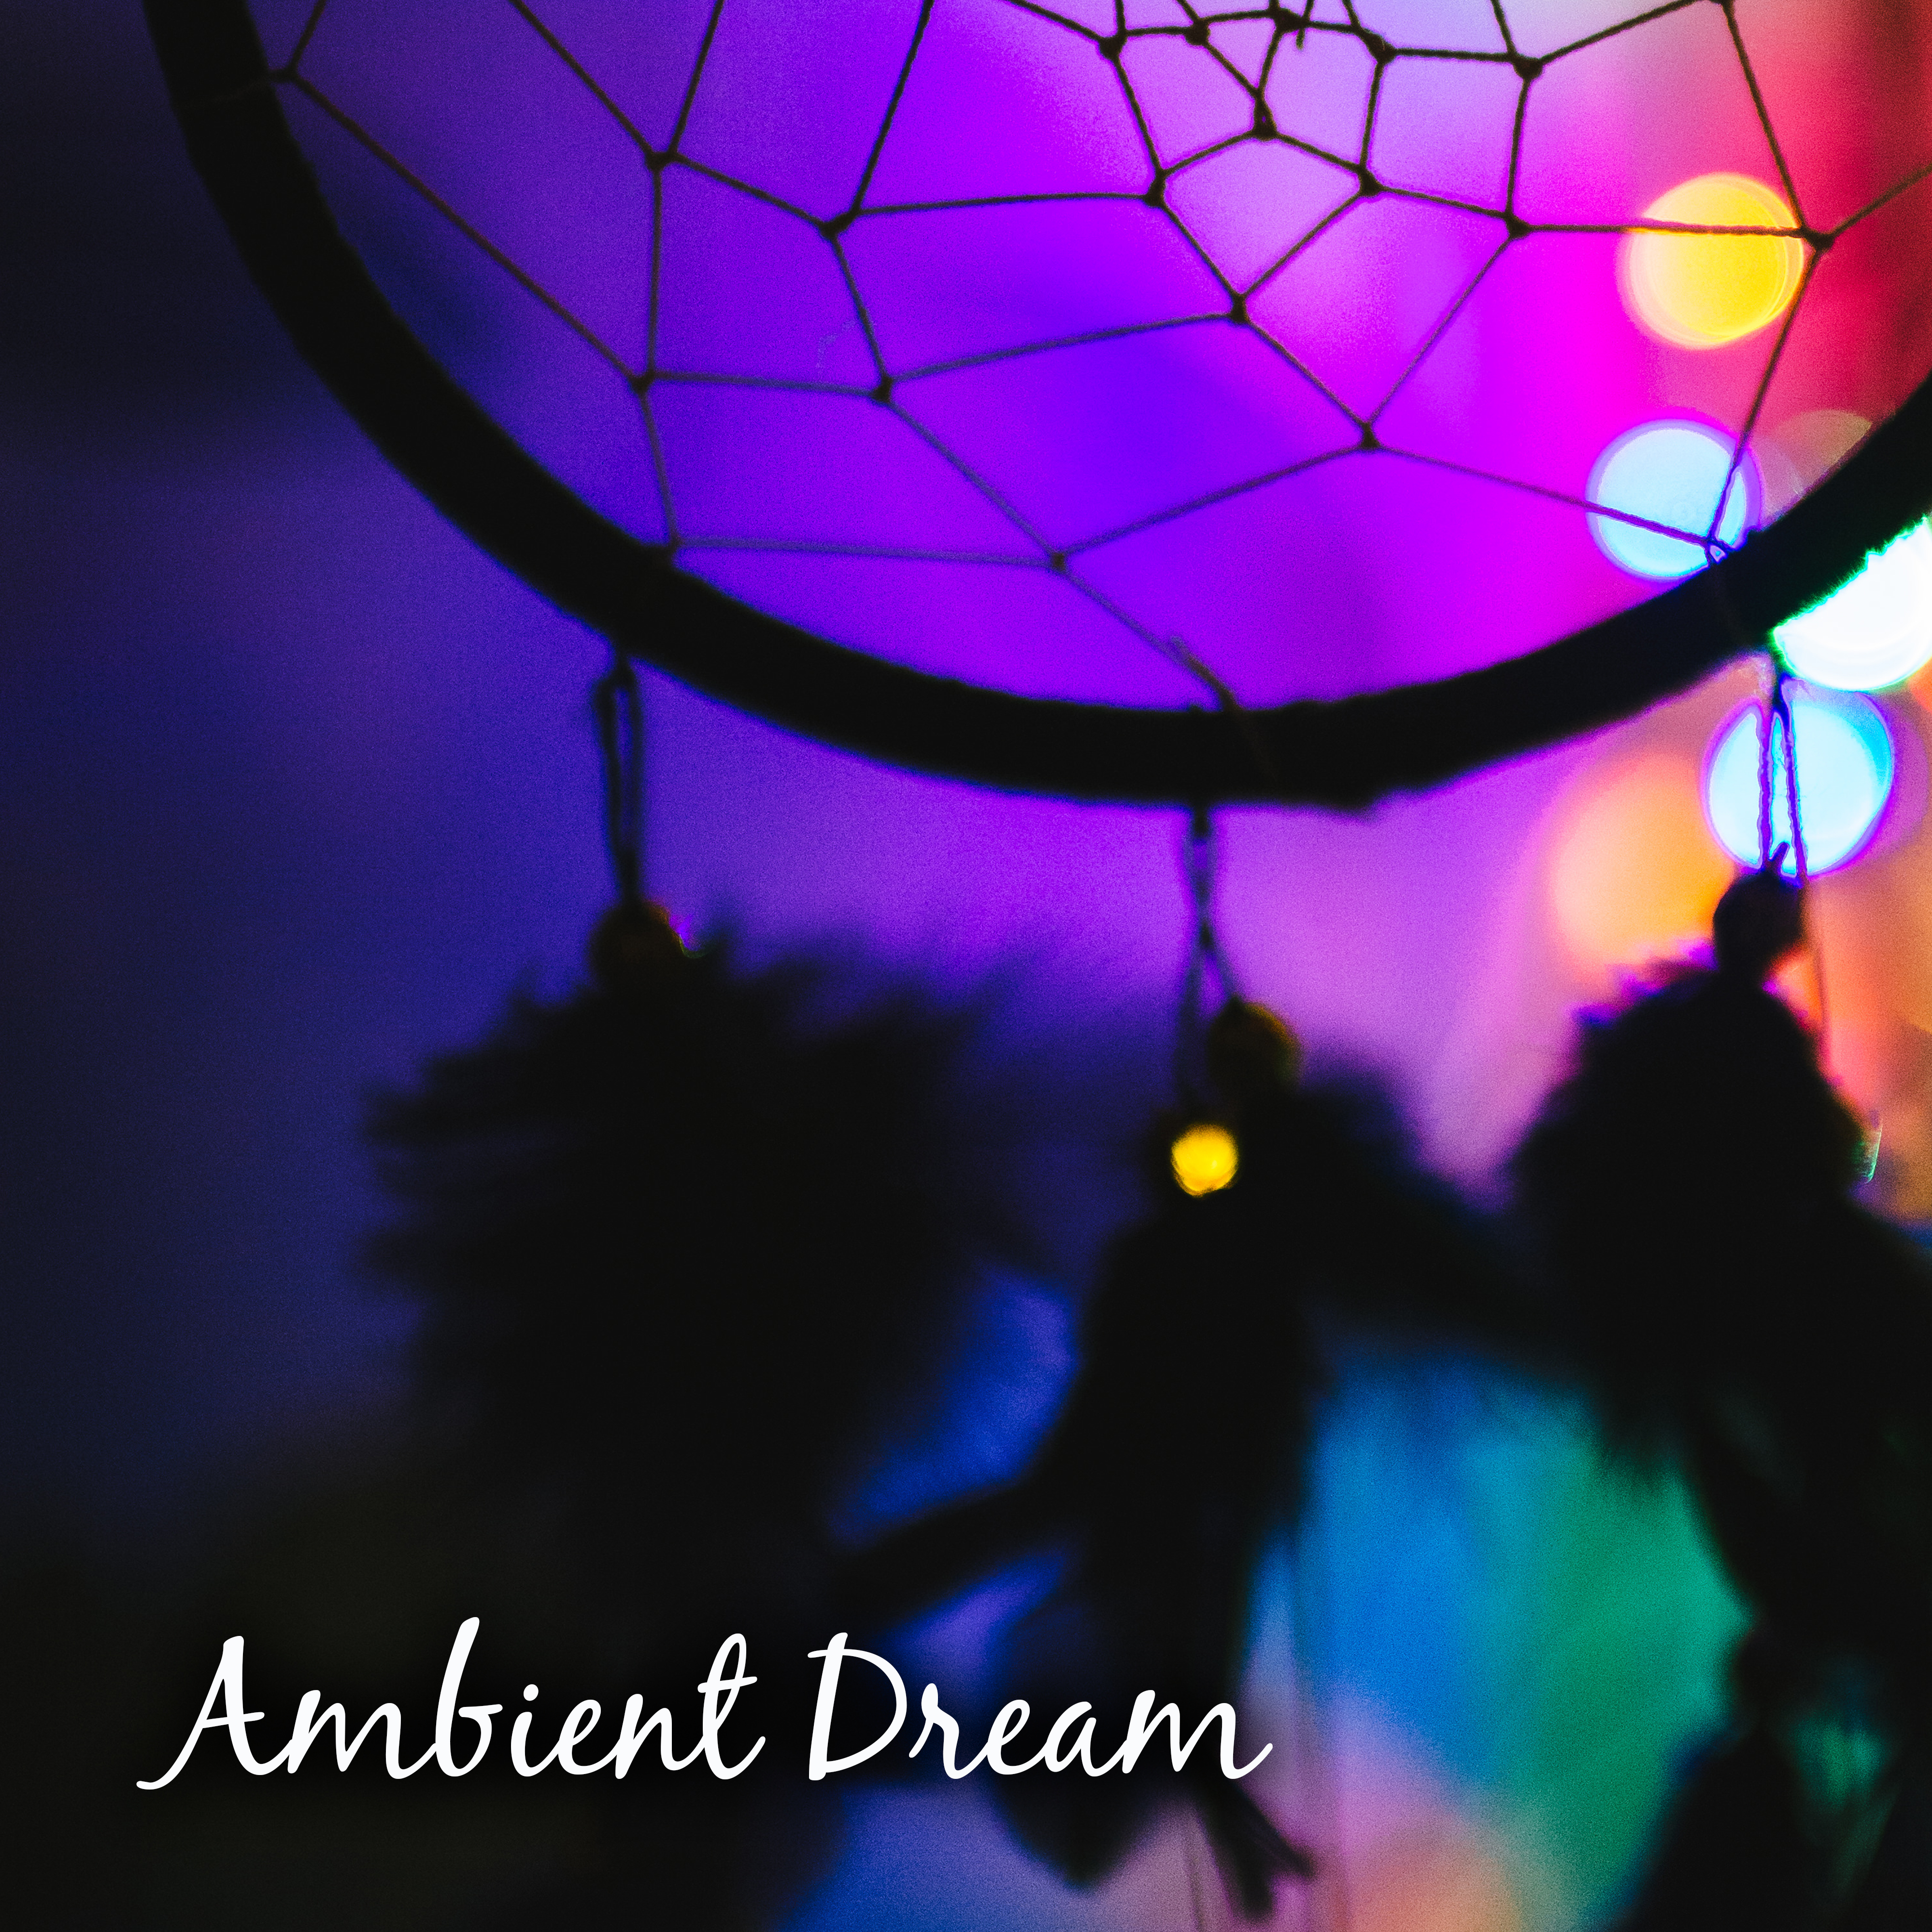 Ambient Dream  Soft Sounds for Sleep, Relaxation, Bedtime, Pure Mind, Restful Sleep, Sweet Melodies to Bed, Night Music